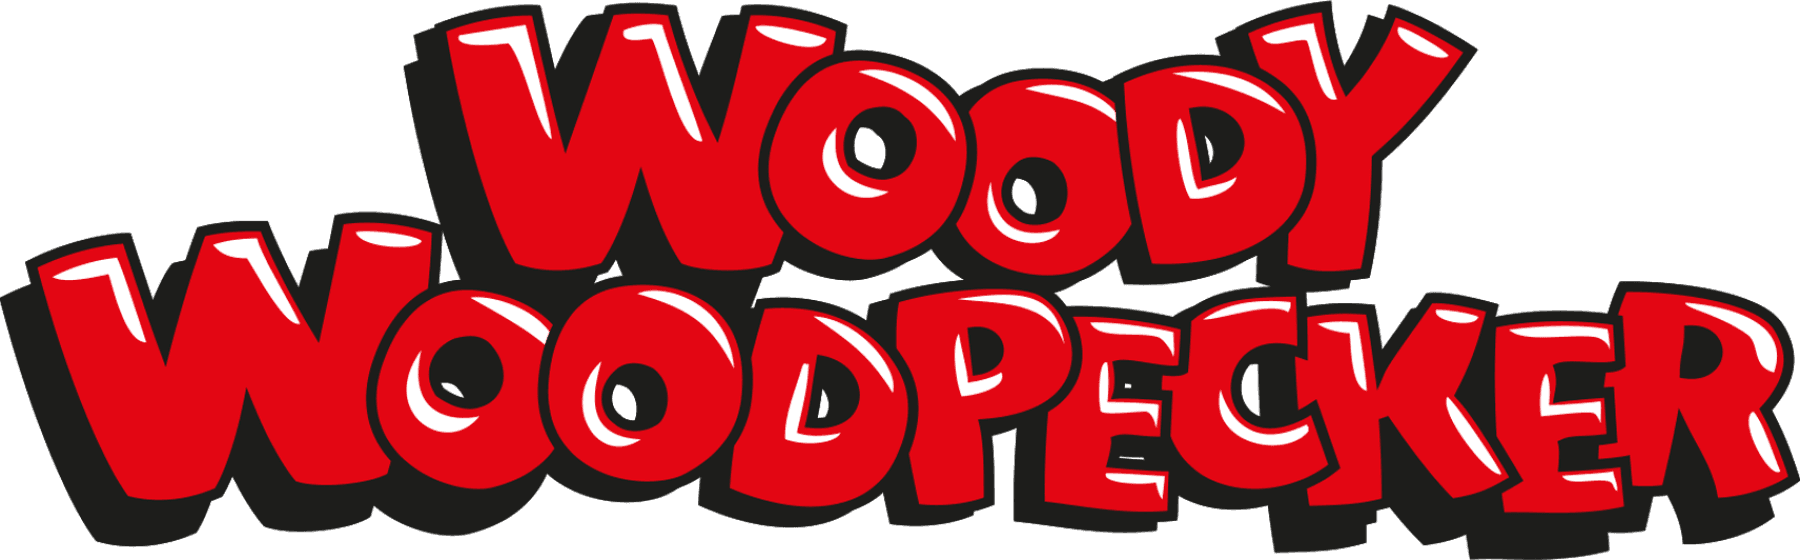 The New Woody Woodpecker Show logo